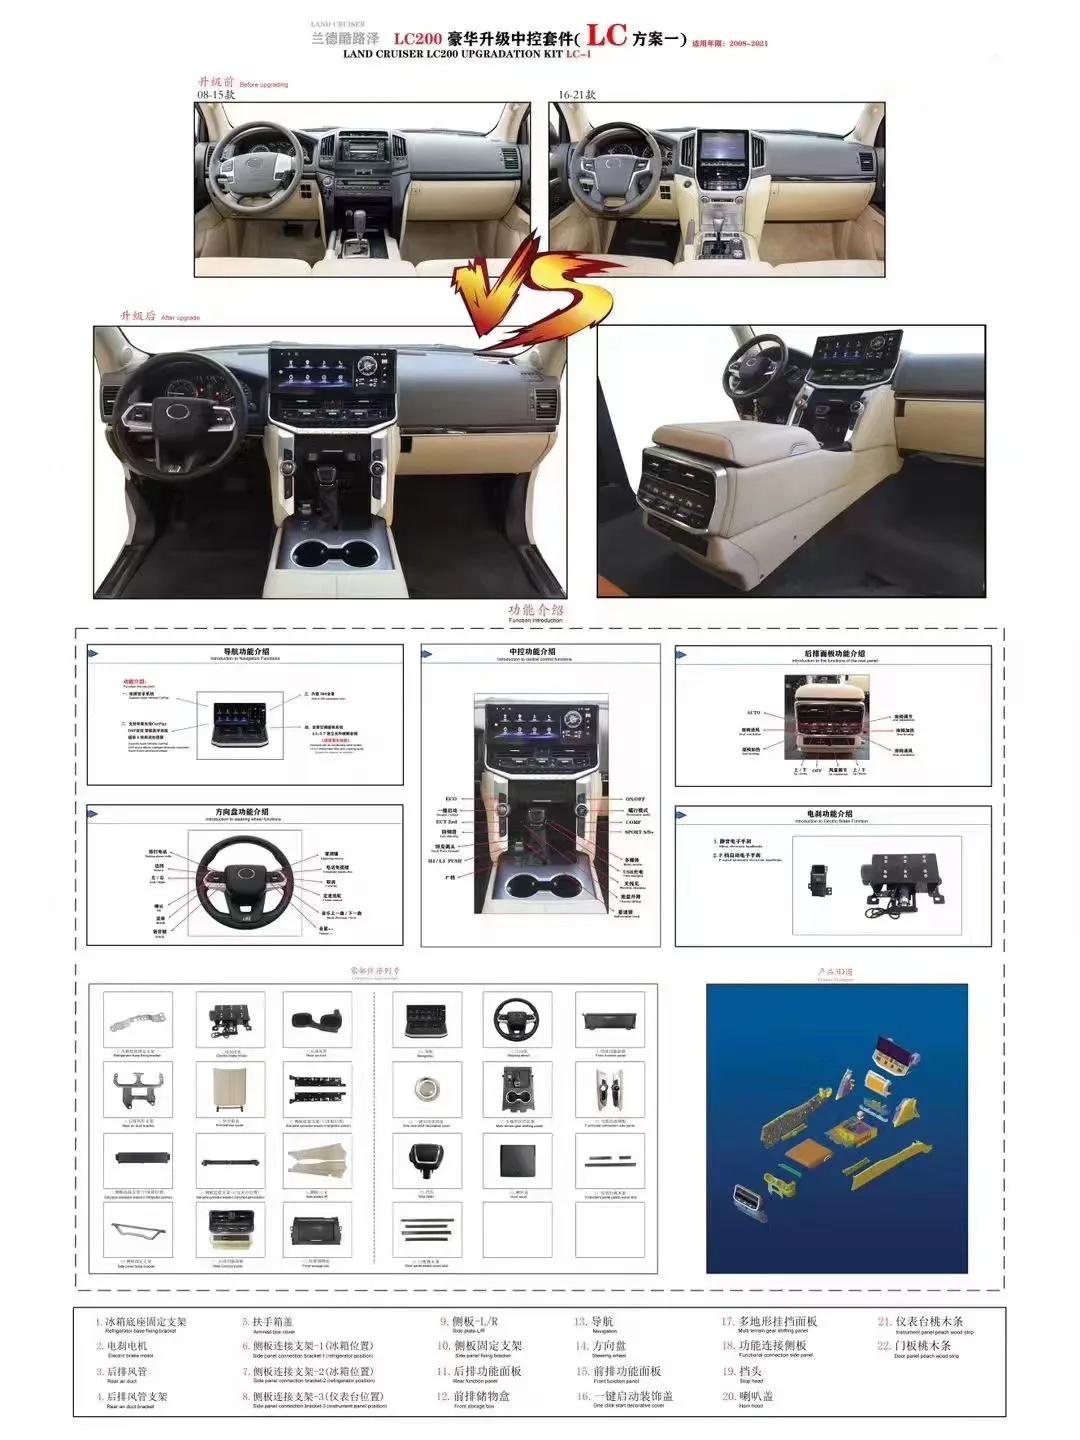 Interior Kit For LC200 To LC300 Details